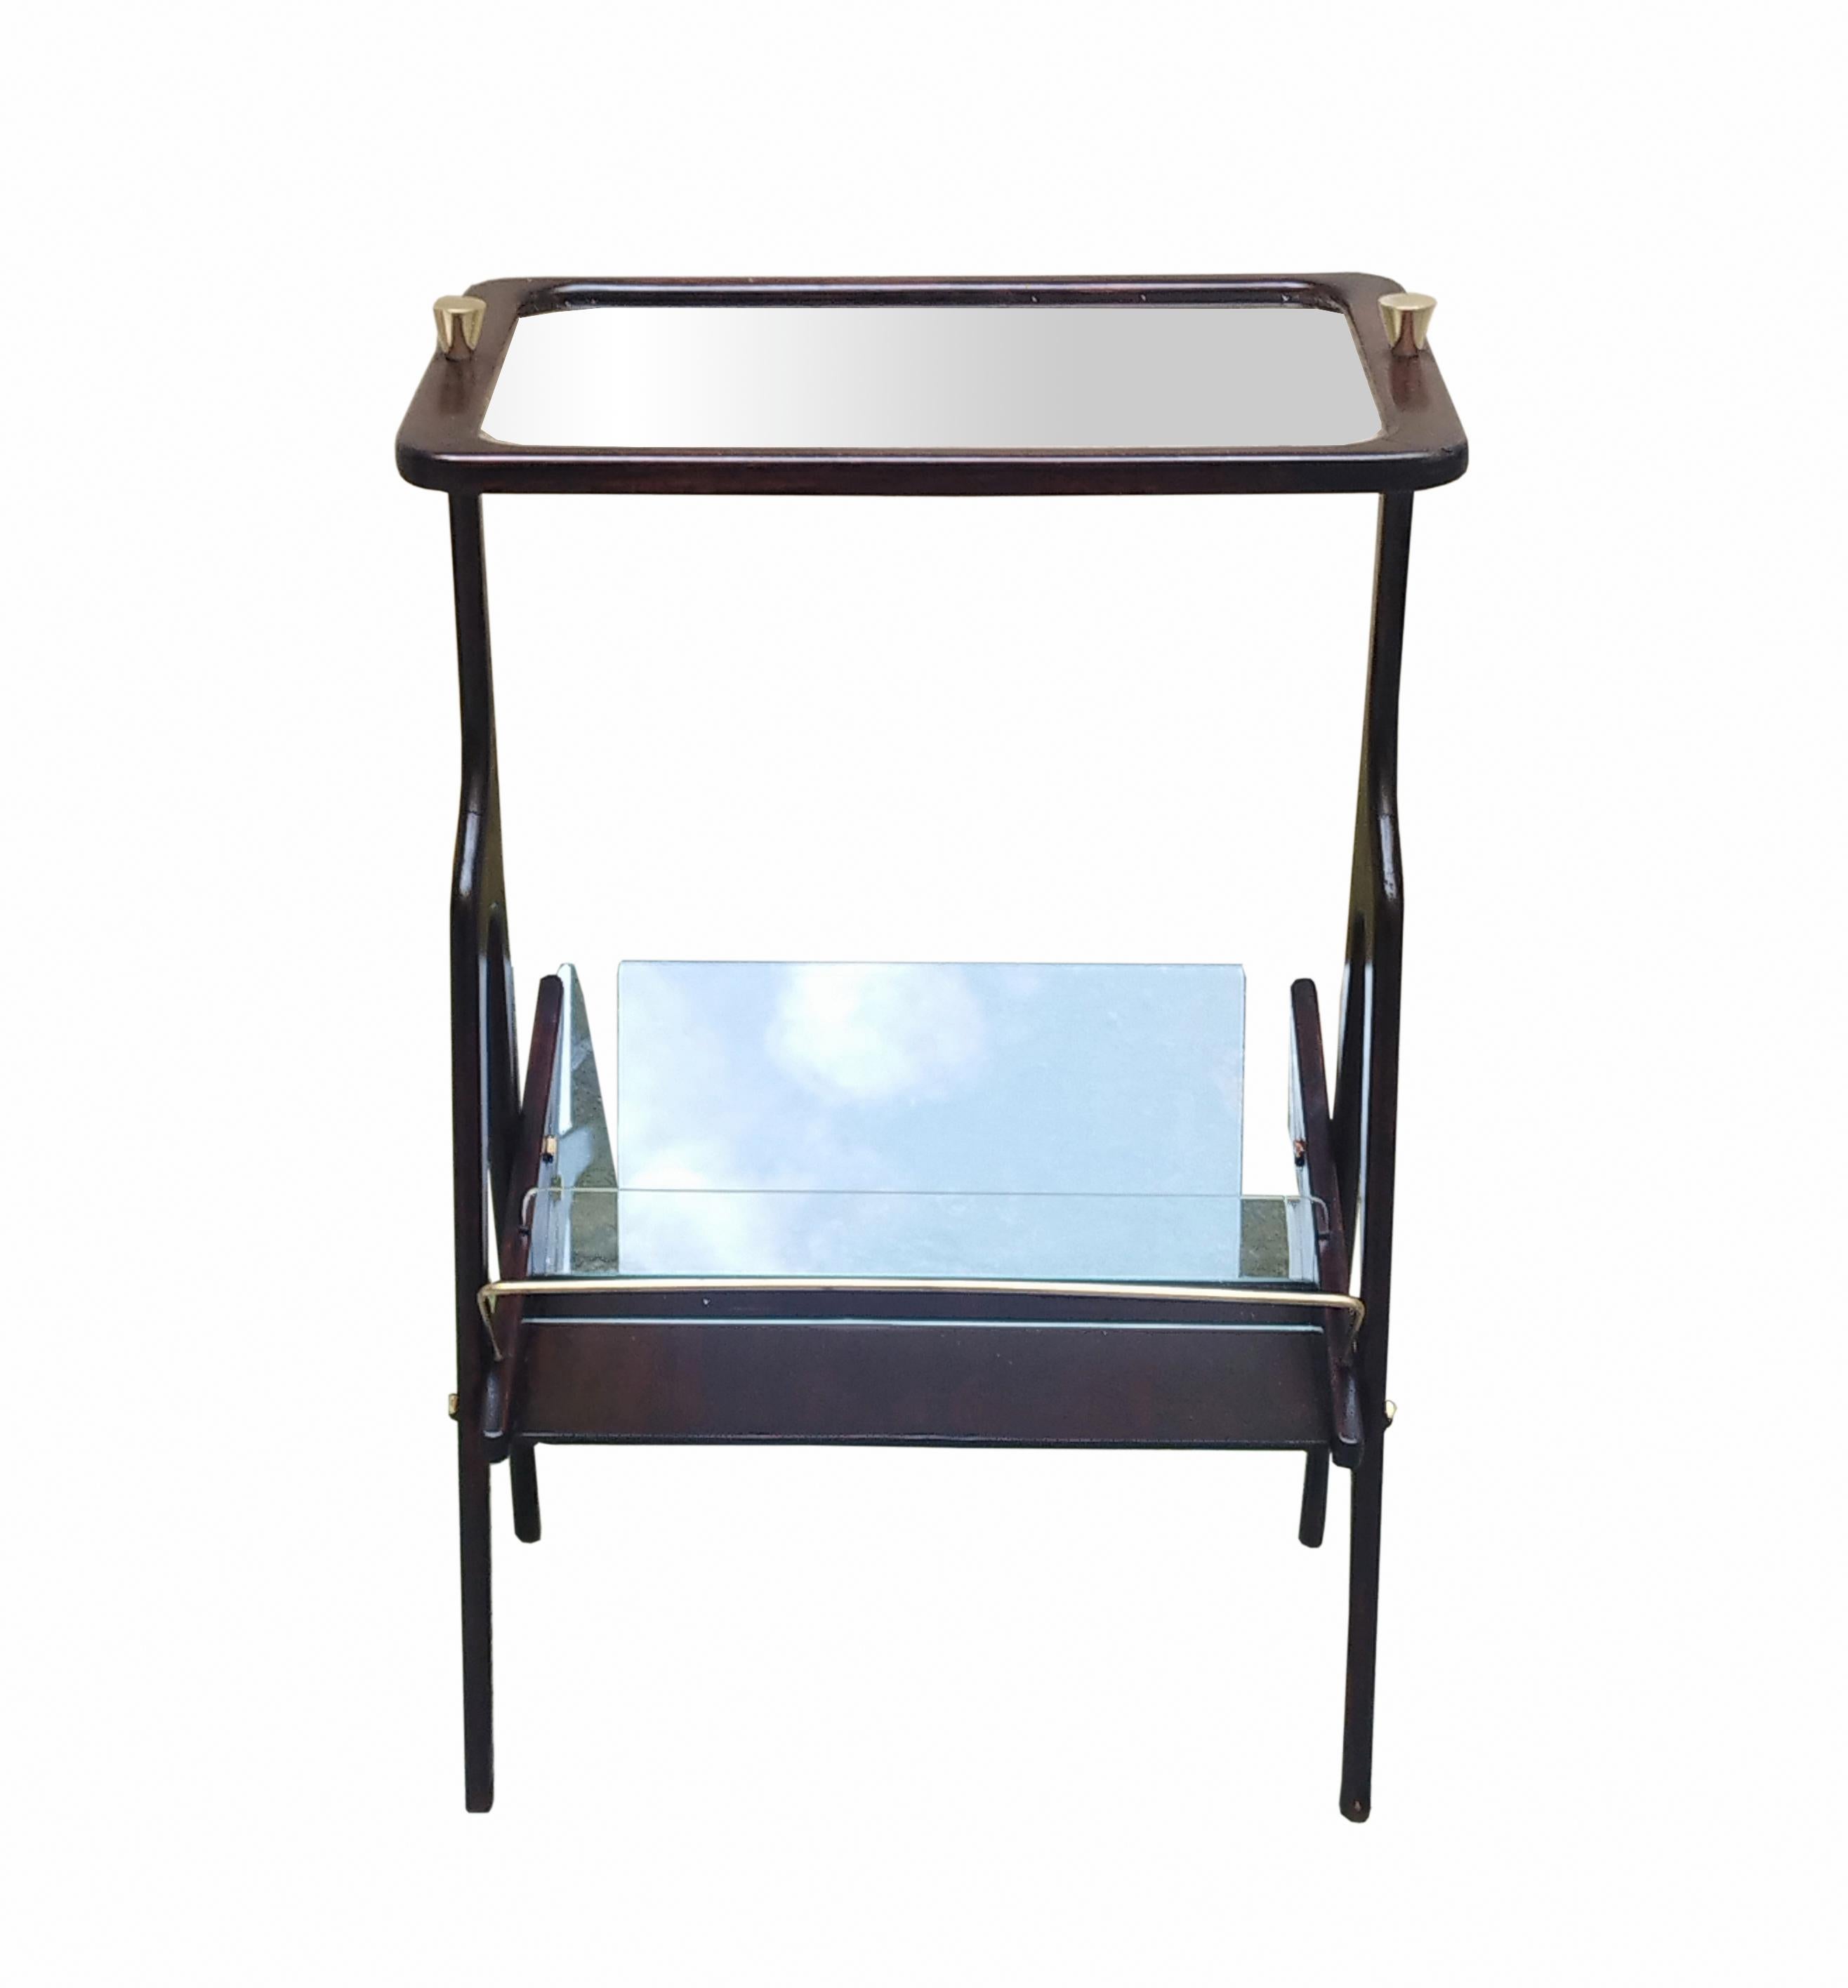 Beautiful coffee table with magazine shelf, designed by Cesare Lacca and made in Italy around 1950. This beautiful piece is made of high-quality wood in a warm dark brown colour. It has a wooden frame and a clear glass top with two brass screws.